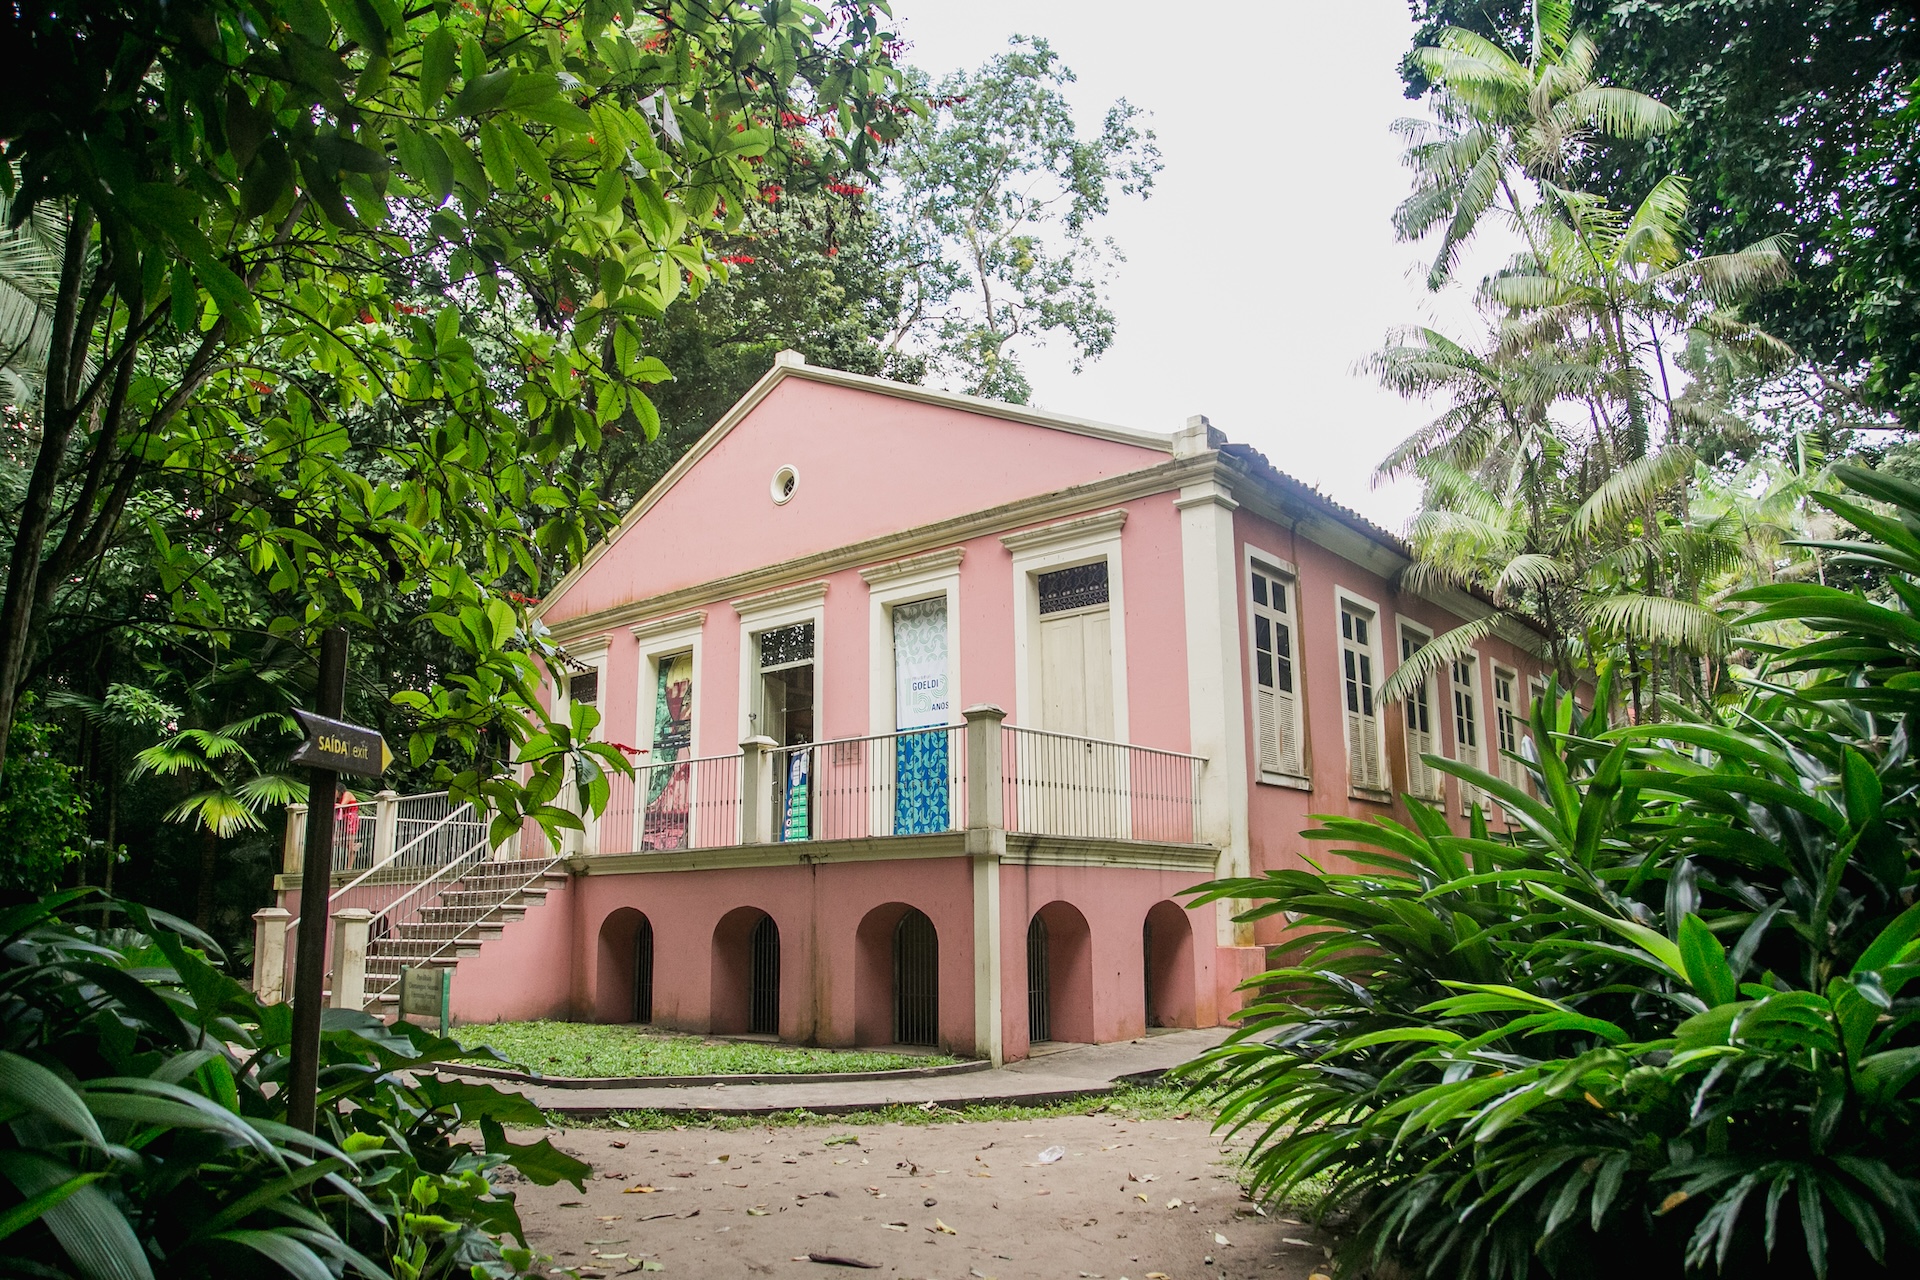 The Museu Paraense Emílio Goeldi, located in Belém, is the first zoobotanical park in Brazil, the oldest scientific institution in the Amazon and the second Brazilian natural history museum.